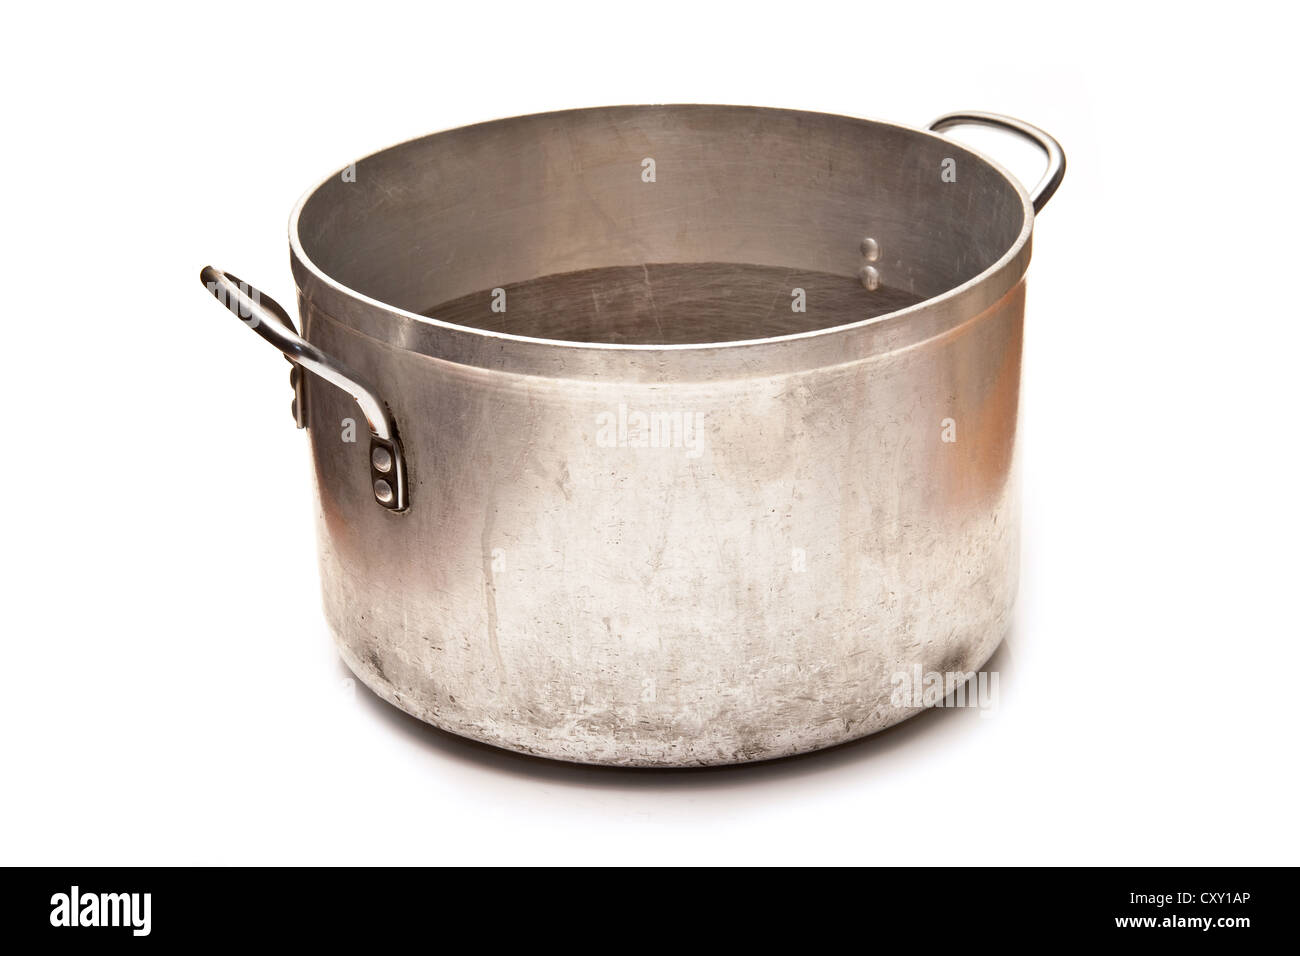 https://c8.alamy.com/comp/CXY1AP/large-metal-saucepan-cooking-pot-isolated-on-a-white-studio-background-CXY1AP.jpg